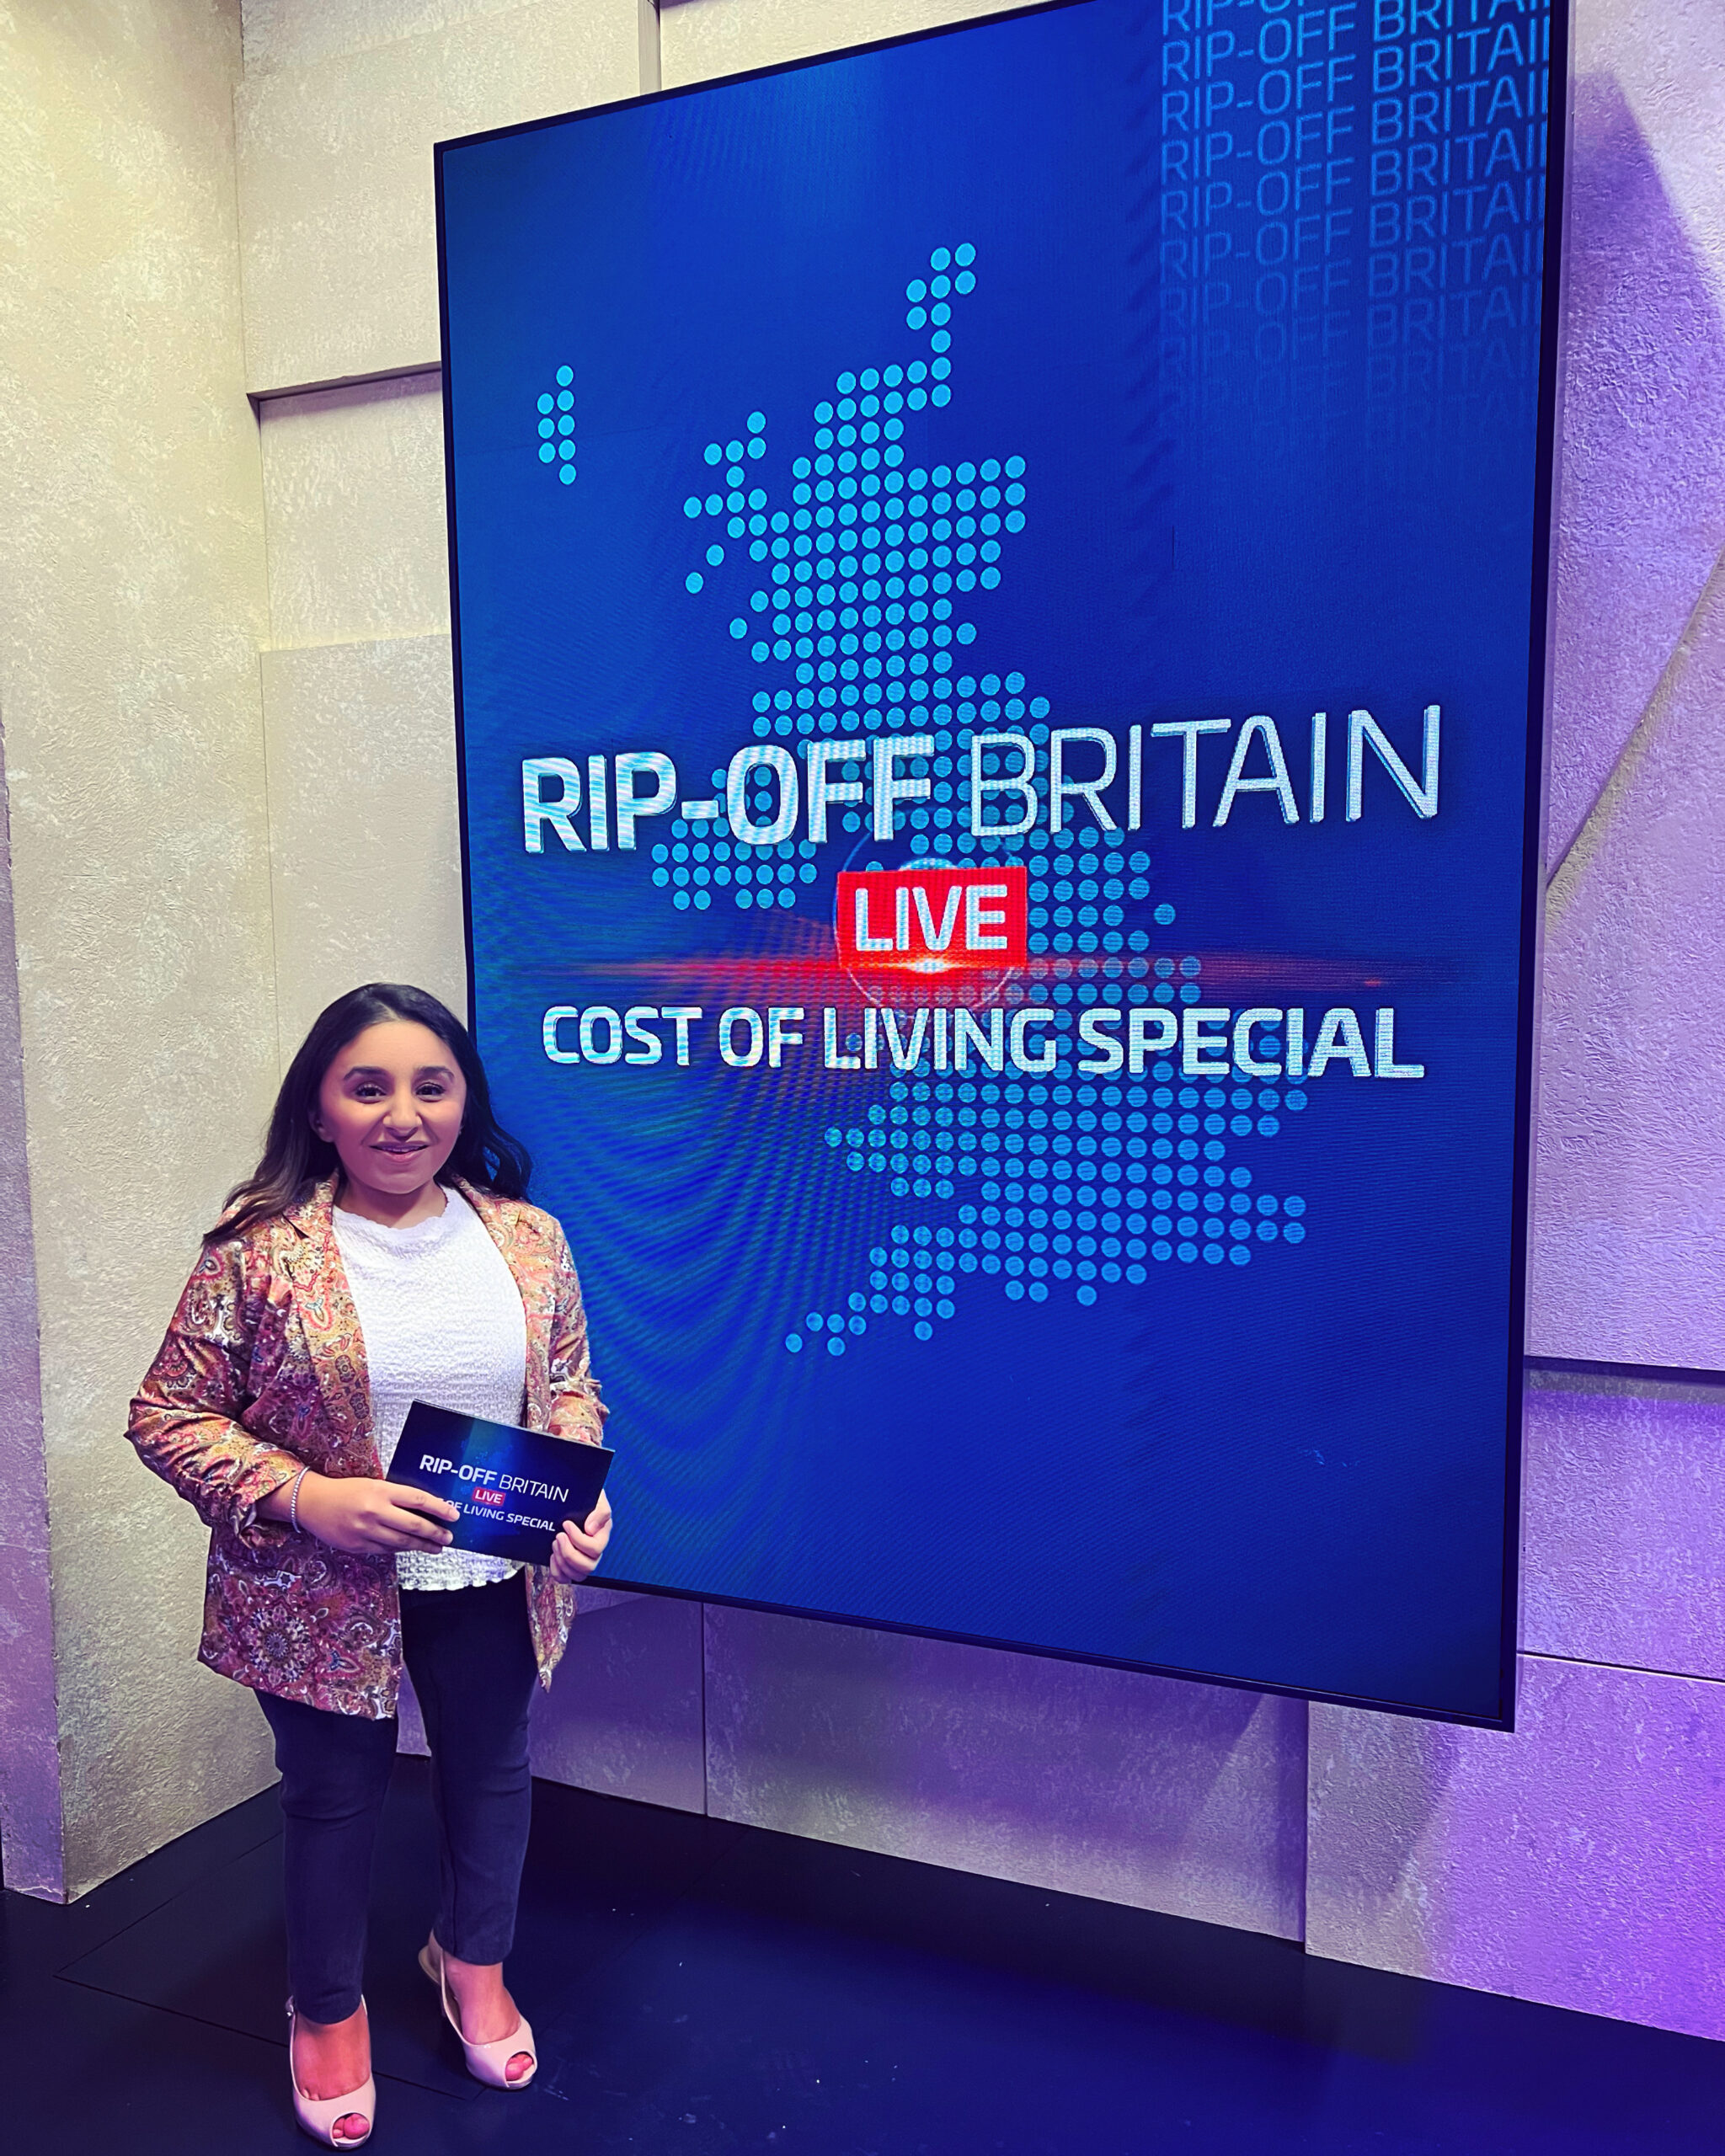 Shani Dhanda stands in front of a large blue digital screen with image of the UK.  It says 'Rip-Off Britain Live, Cost of Living Special', the same as the card Shani is holding. Shani is a South Asian short-stature woman in her mid-thirties with long brown hair.  She wears a gold brocade jacket, white top, blue jeans and nude slingback shoes.  